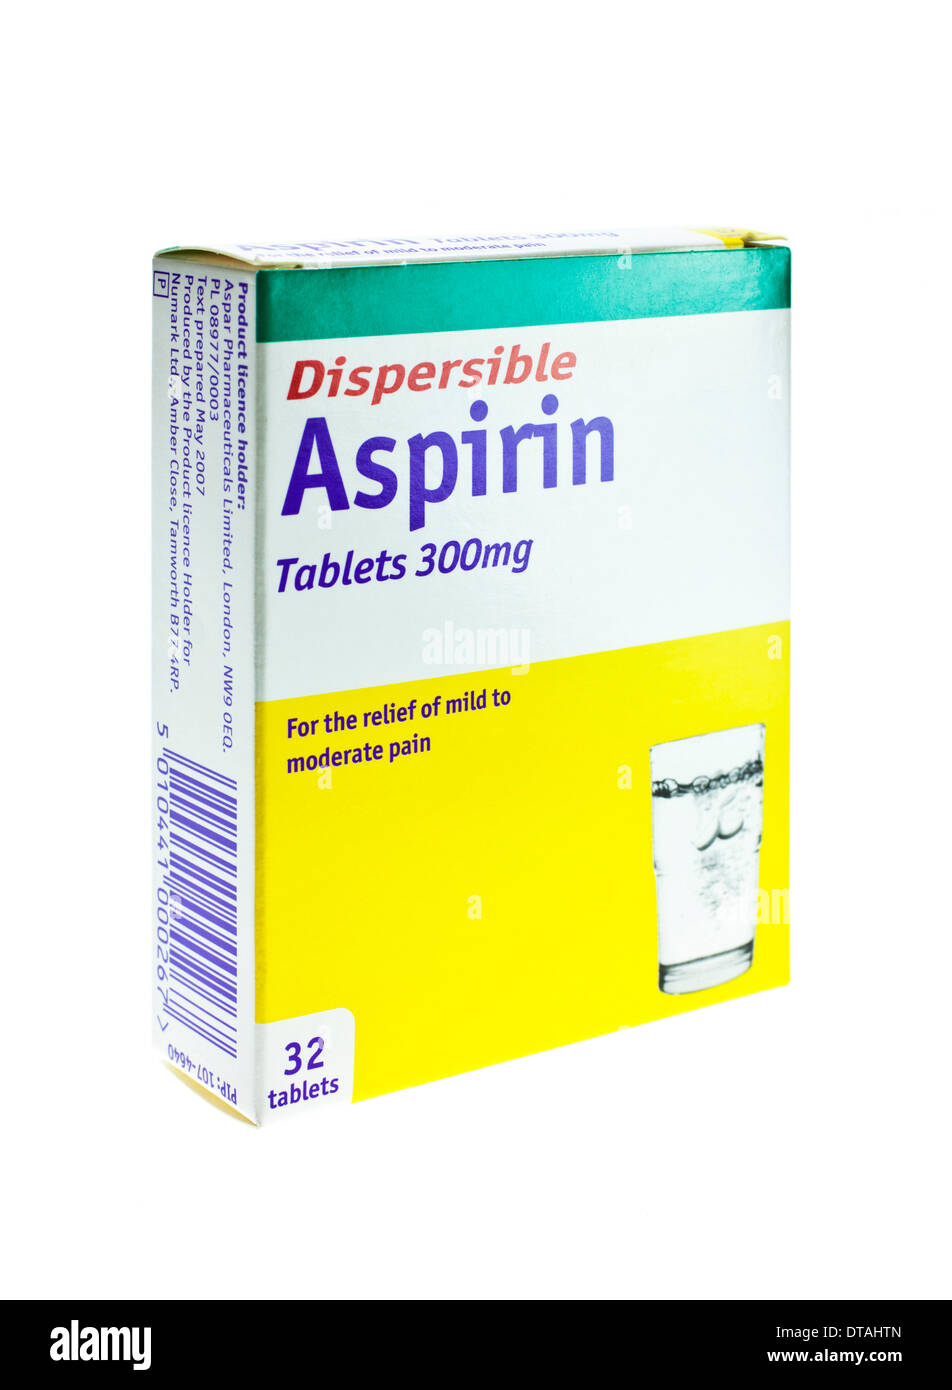 Box of  32 dispersible soluble aspirin 300mg tablets on a white background Stock Photo